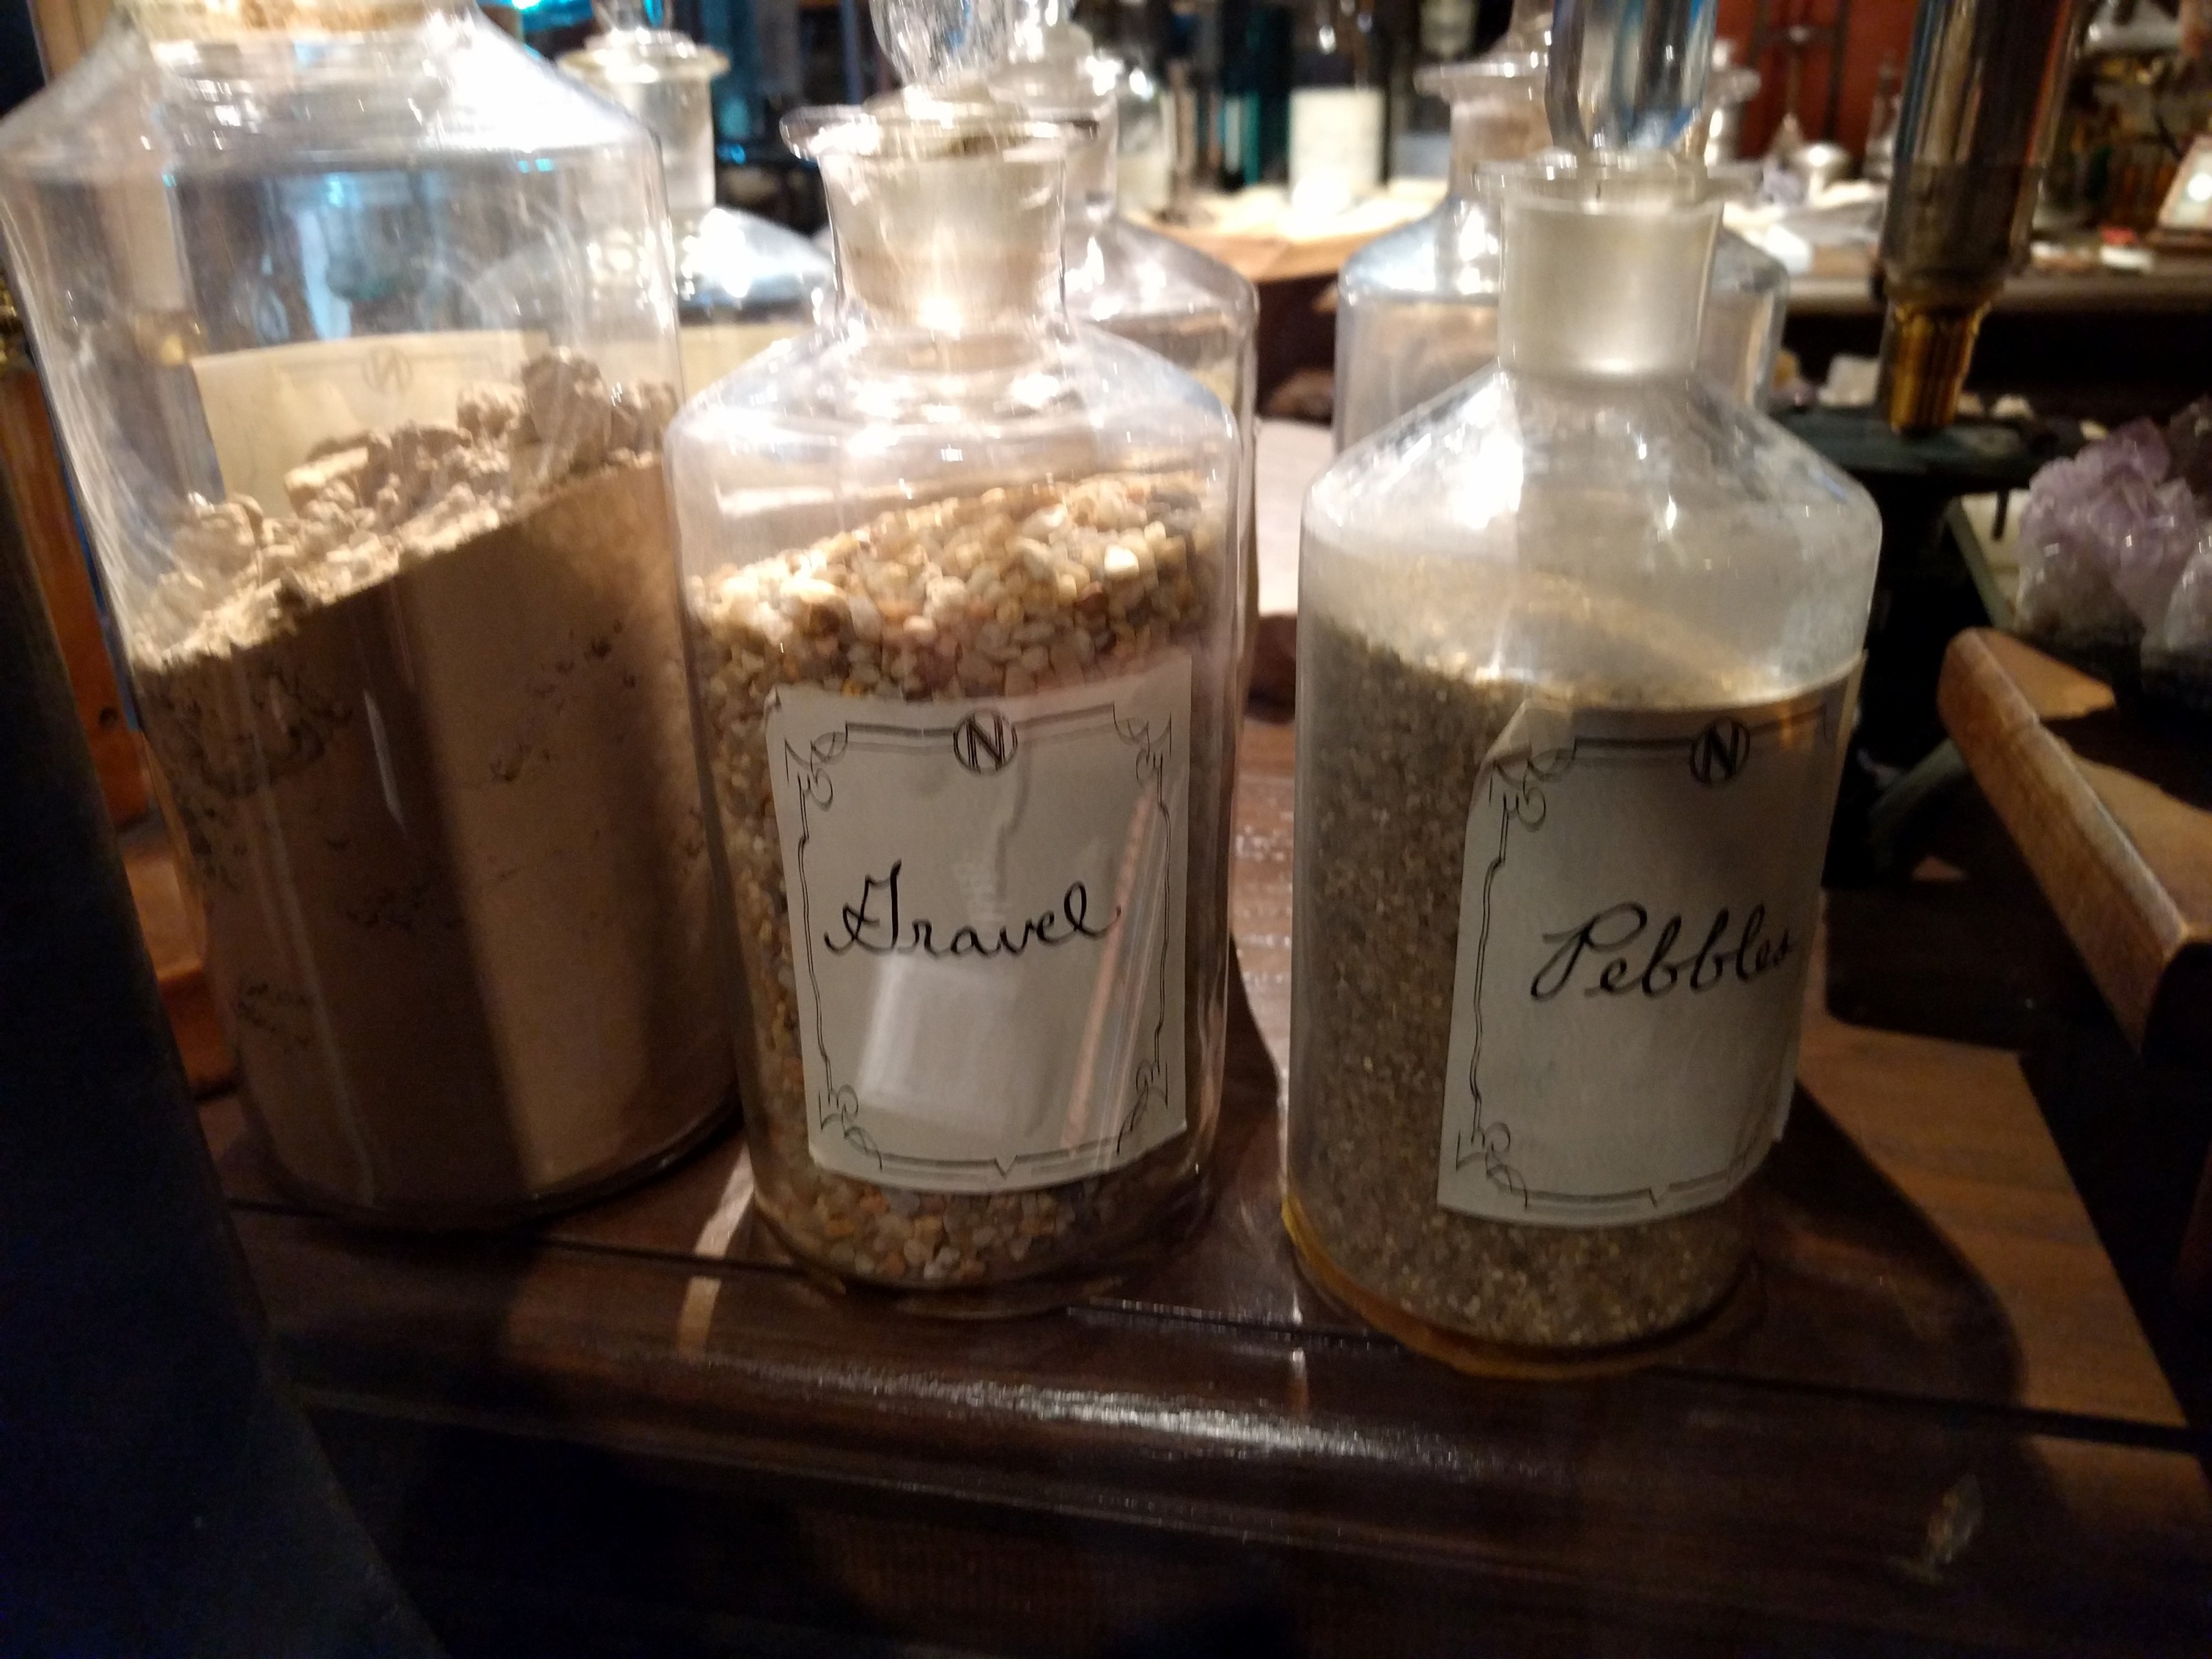 Samples from excavated and stored in the labs inside the ride. I have no idea what the difference between pebbles and gravel is, but I assume there is one.